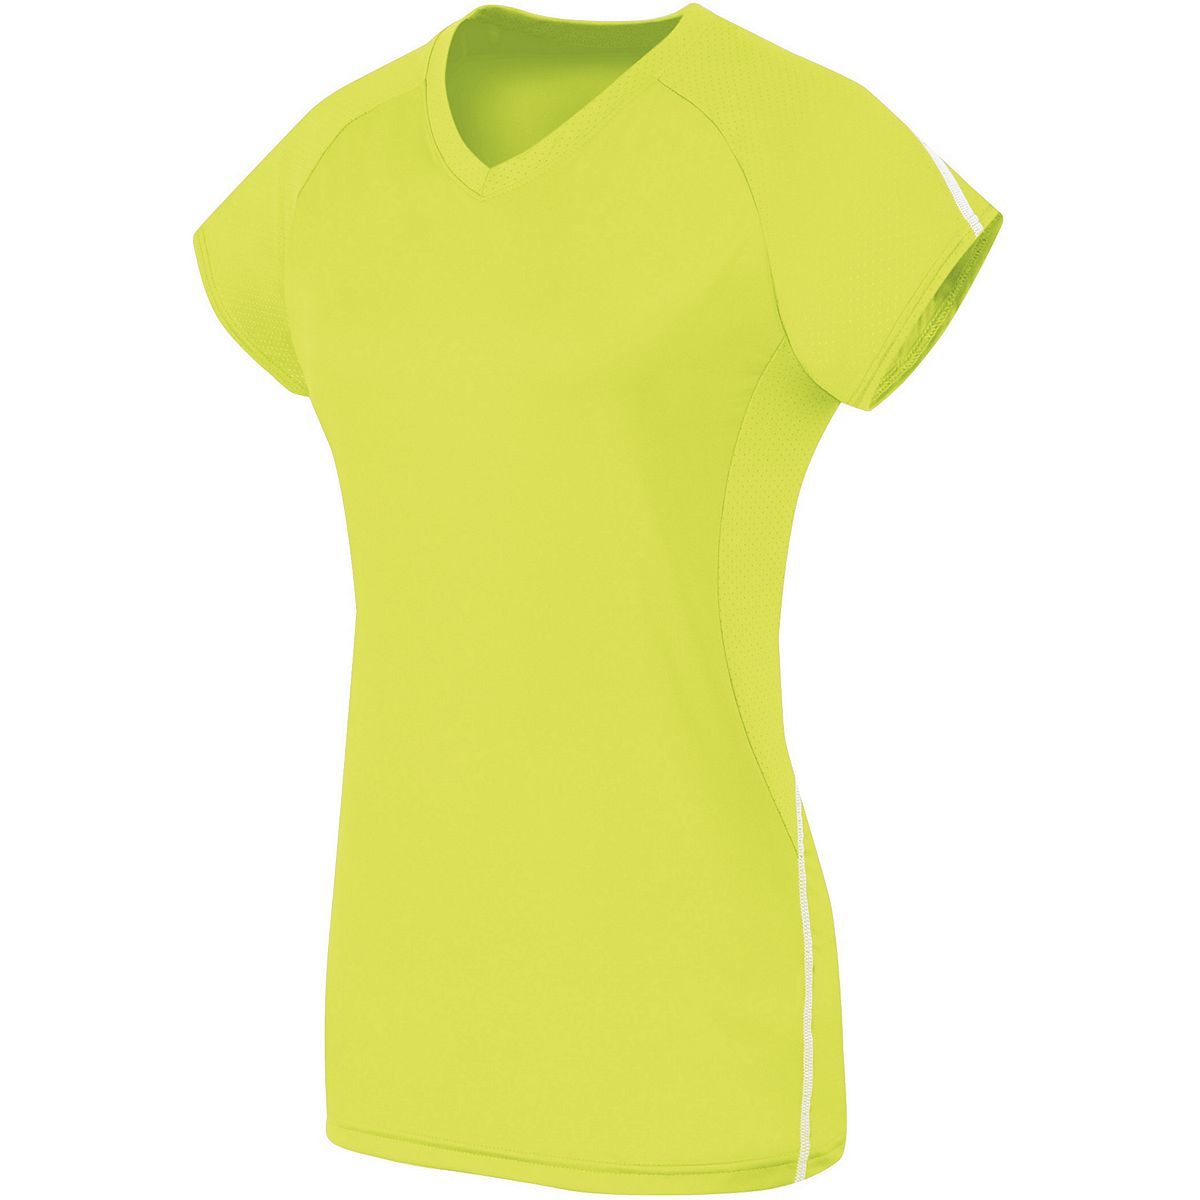 High 5 Ladies Short Sleeve Solid Jersey in Lime/White  -Part of the Ladies, Ladies-Jersey, High5-Products, Volleyball, Shirts product lines at KanaleyCreations.com